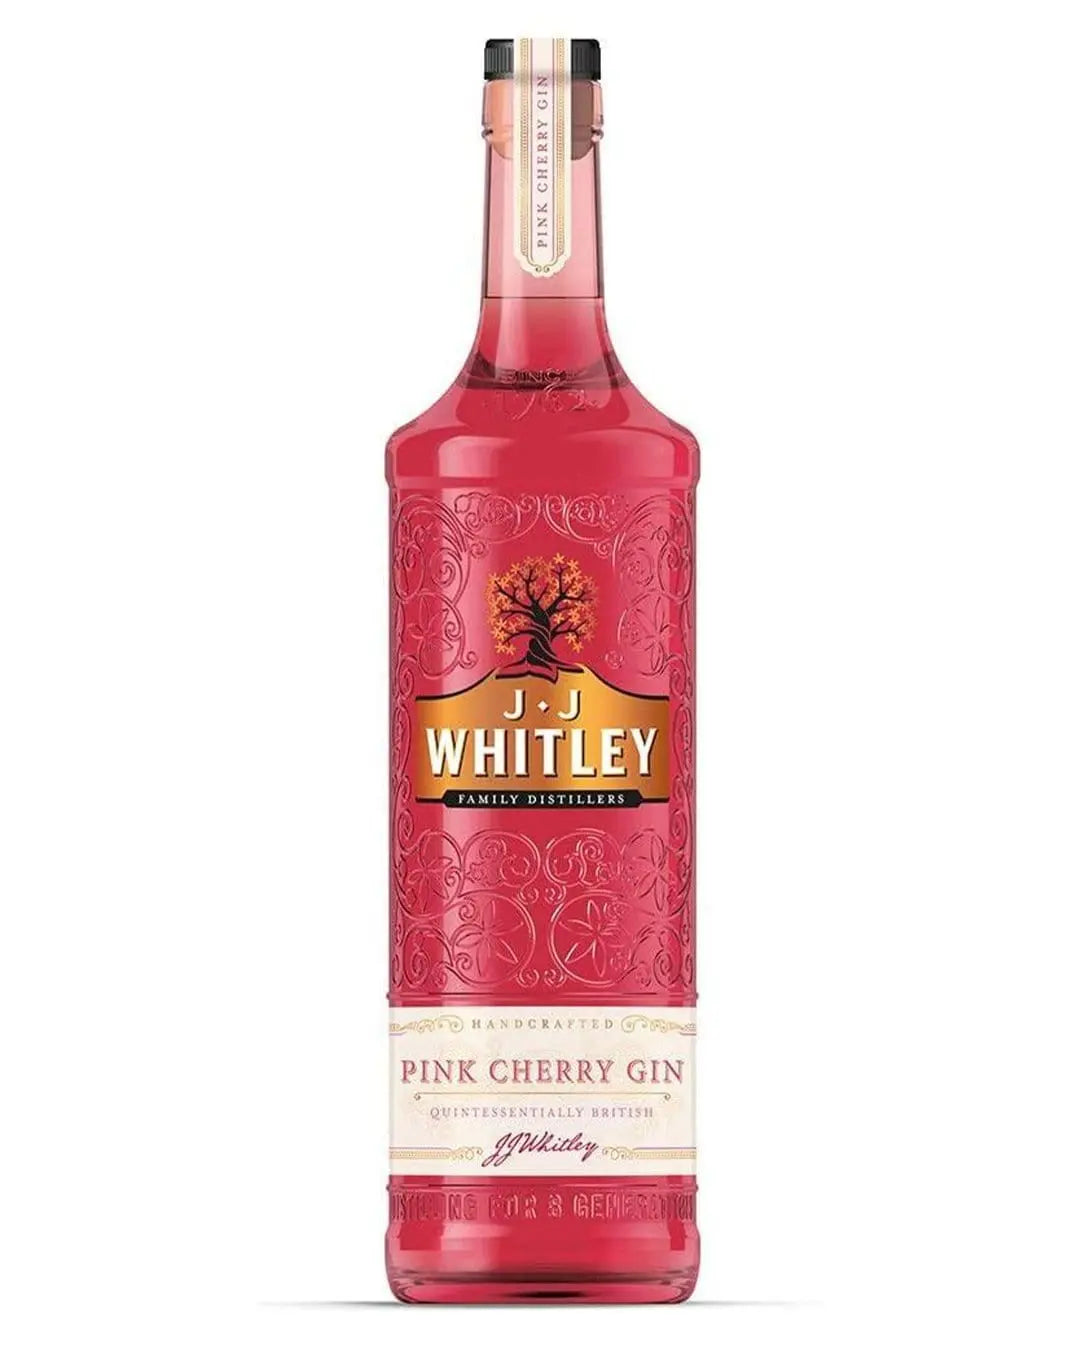 J.J. Whitley Pink Cherry Gin, 70 cl Gin 5011166060819